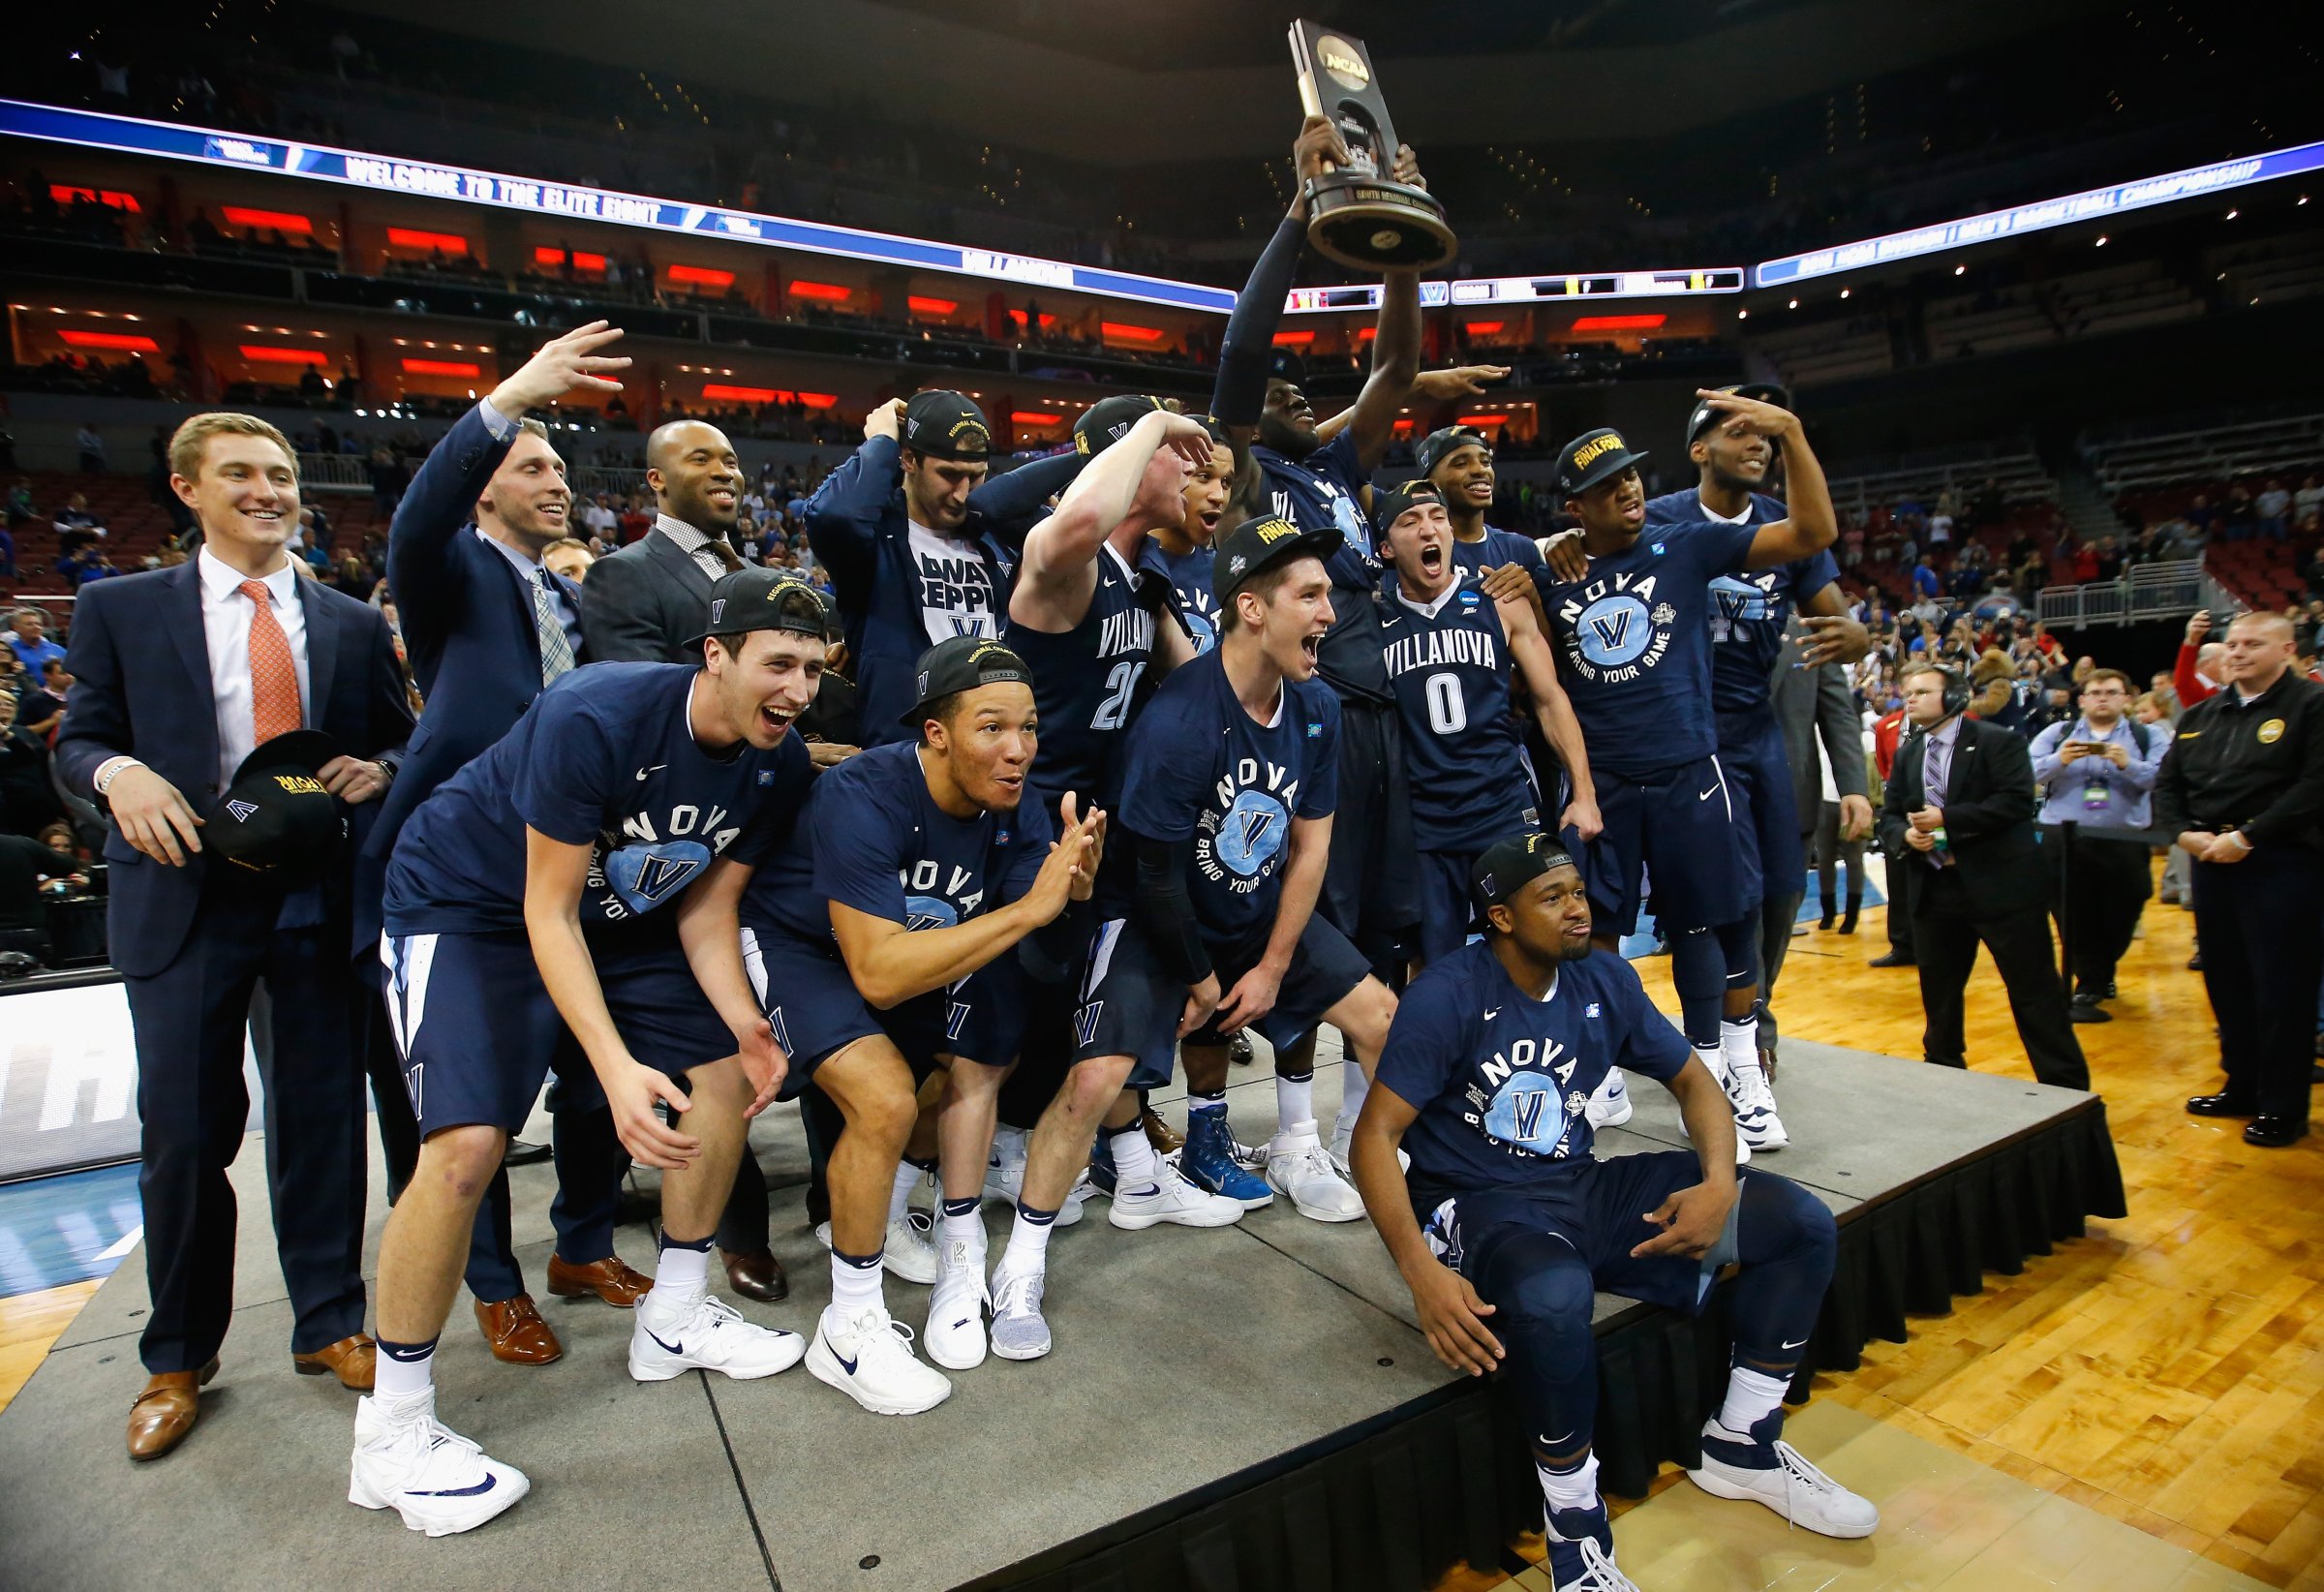 The Villanova Wildcats celebrate defeating the Kansas Jayhawks during the 2016 NCAA Men's Basketball Tournament South Regional on March 26, 2016 in Louisville, Ky.